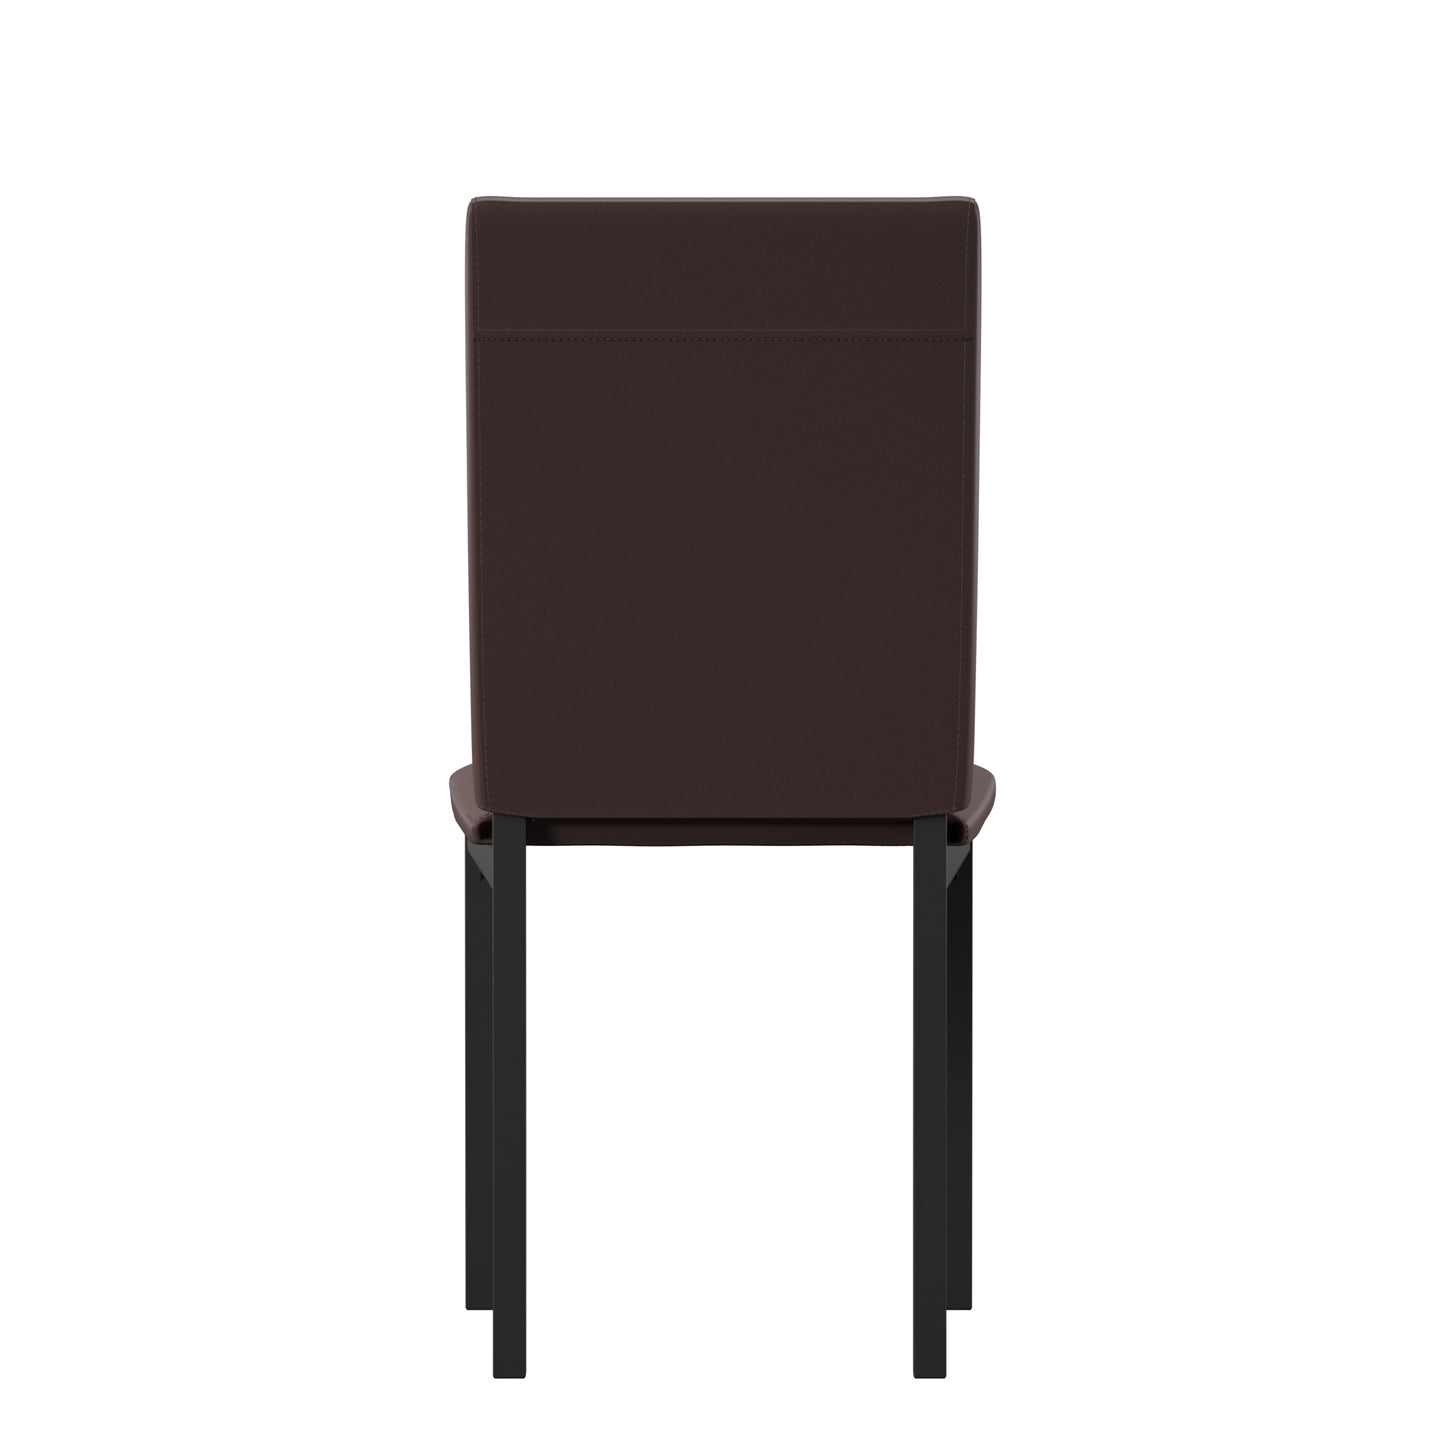 Metal Upholstered Dining Chairs - Brown Faux Leather, Set of 2